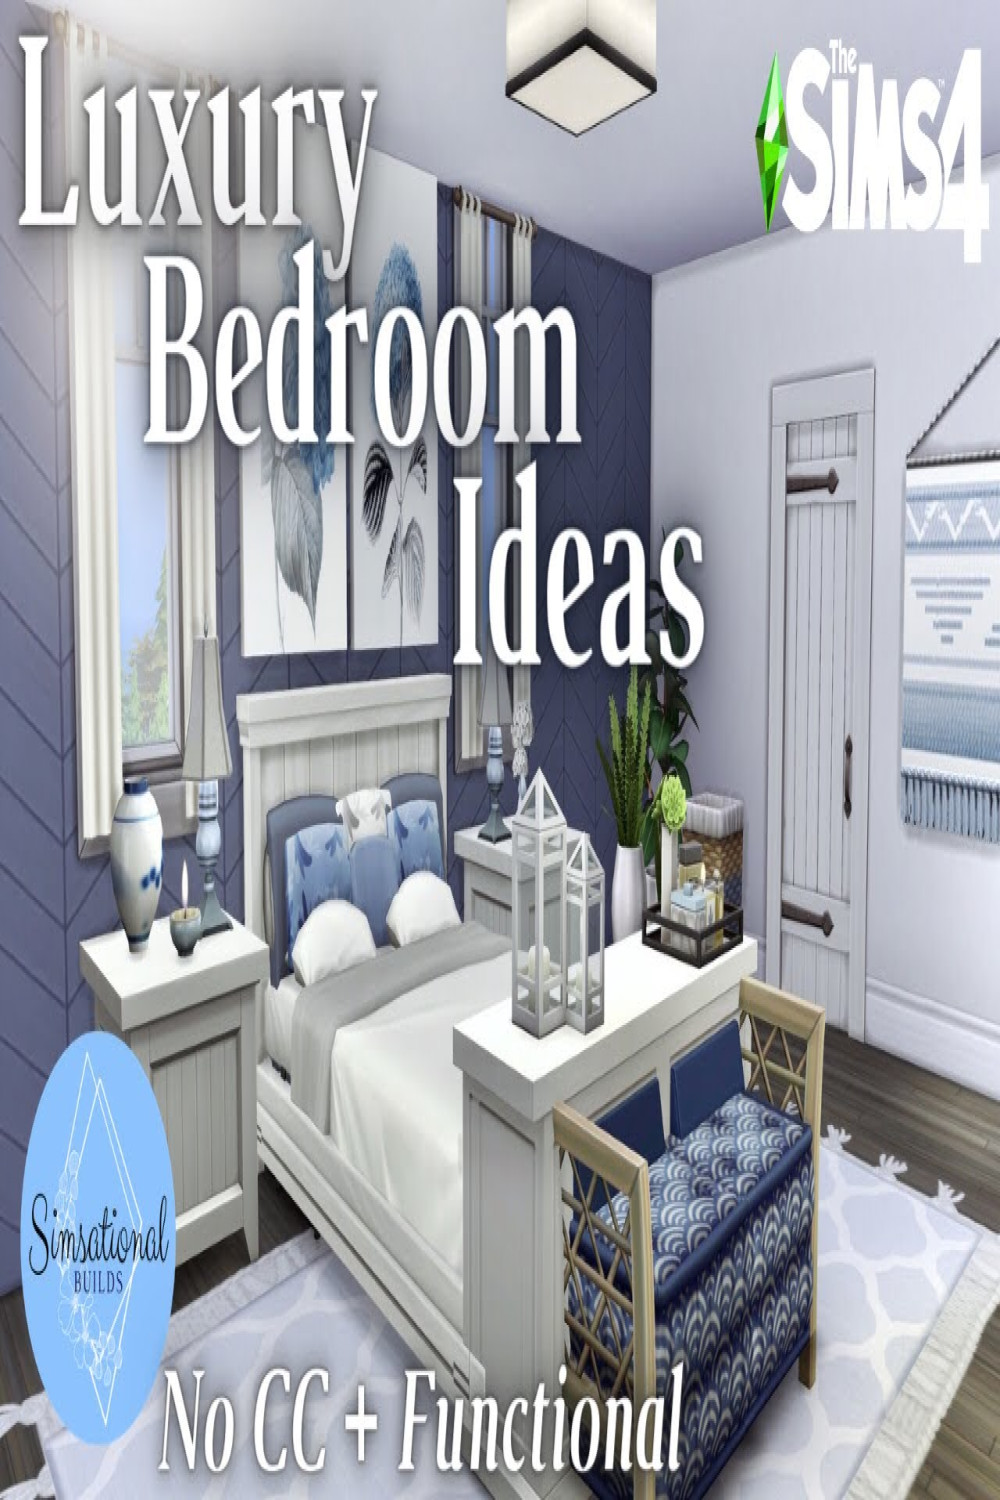 Luxury Bedroom Ideas  No CC Furniture  Stop Motion Tutorial  The Sims    Simsational Builds